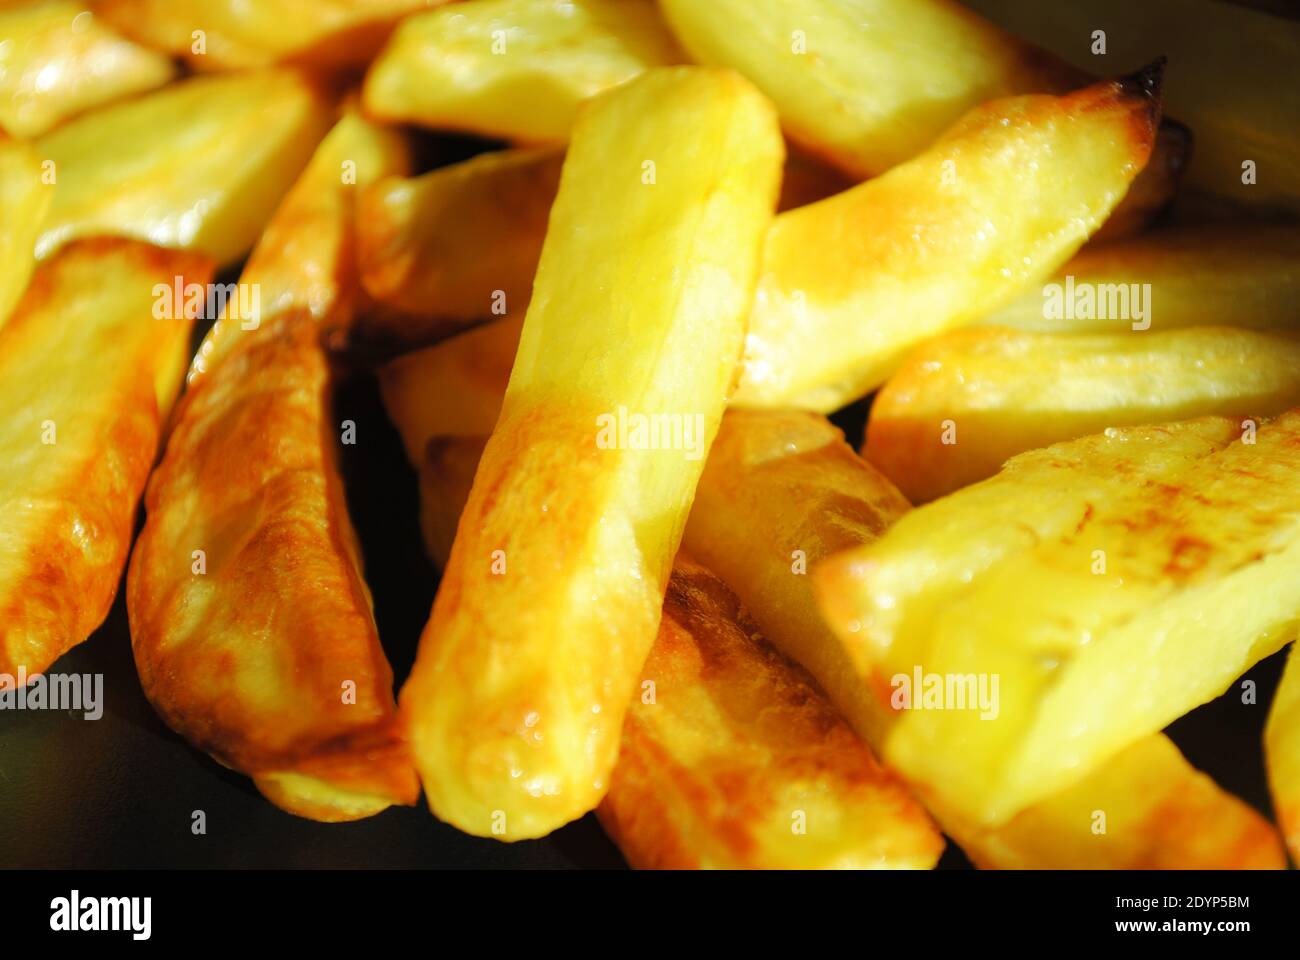 A close-up of a delicious portion of oven-baked potato chips. Stock Photo